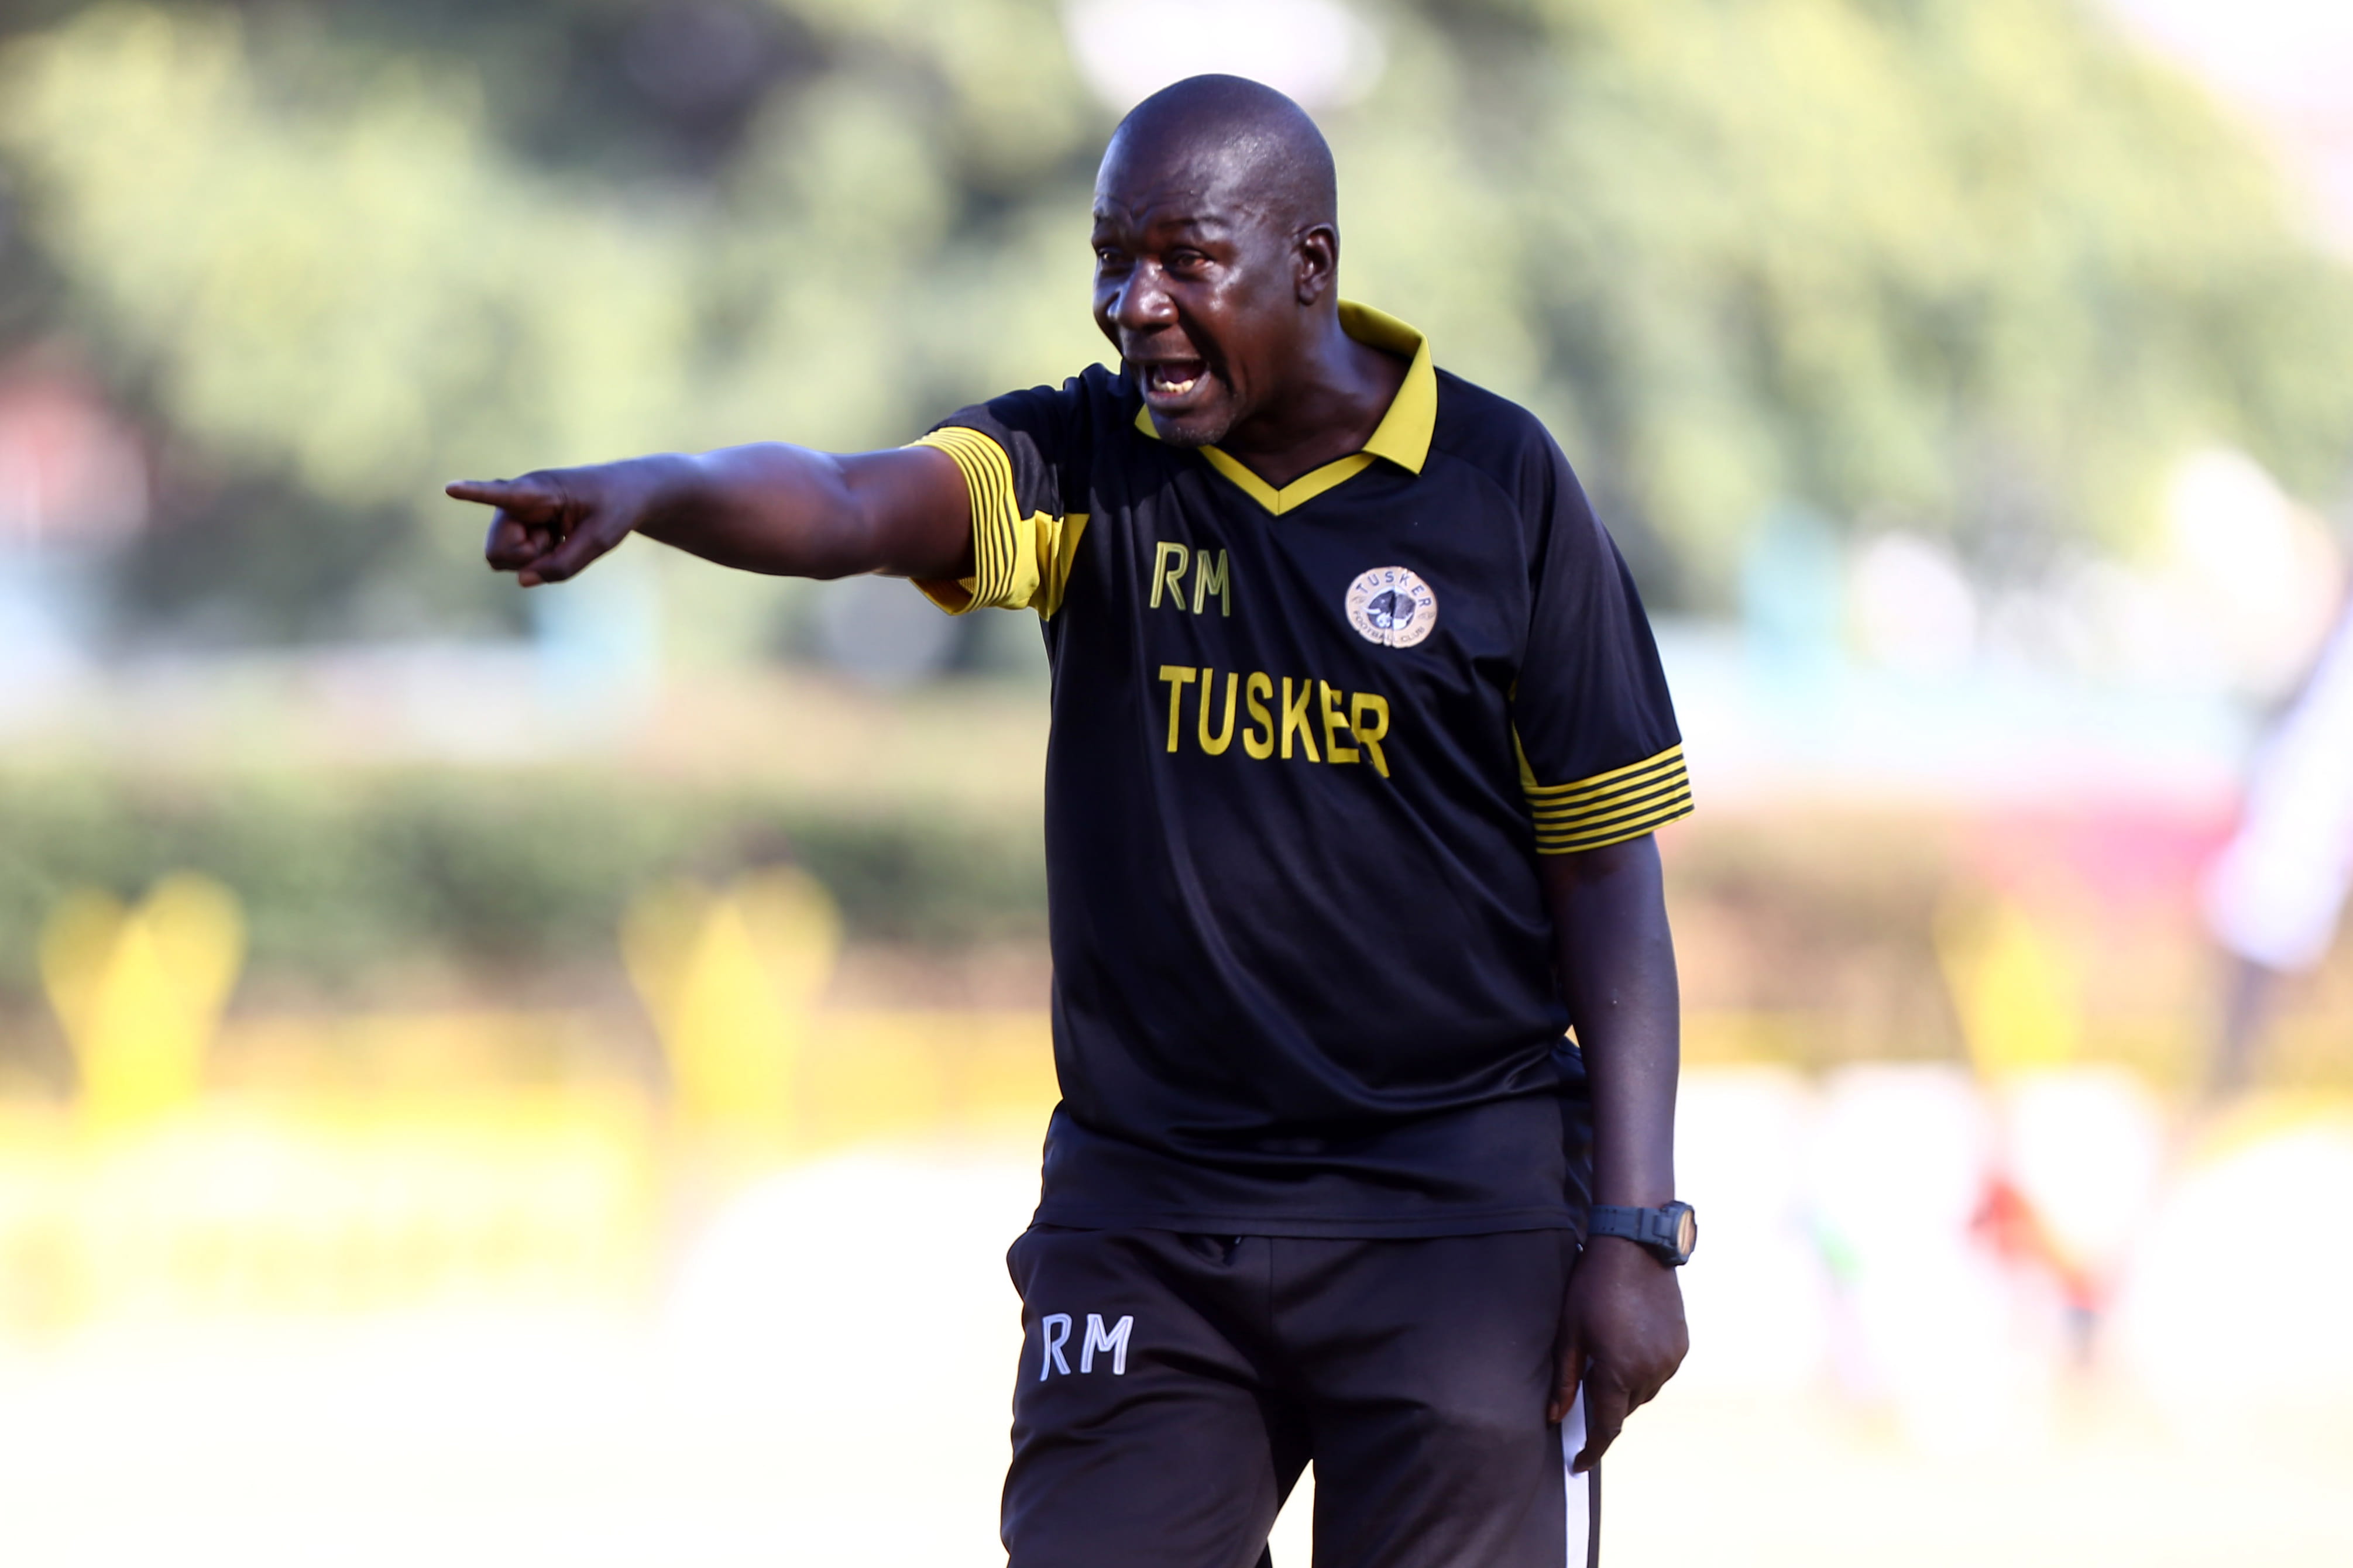 Tusker FC braces for new season after departure of Matano and key players